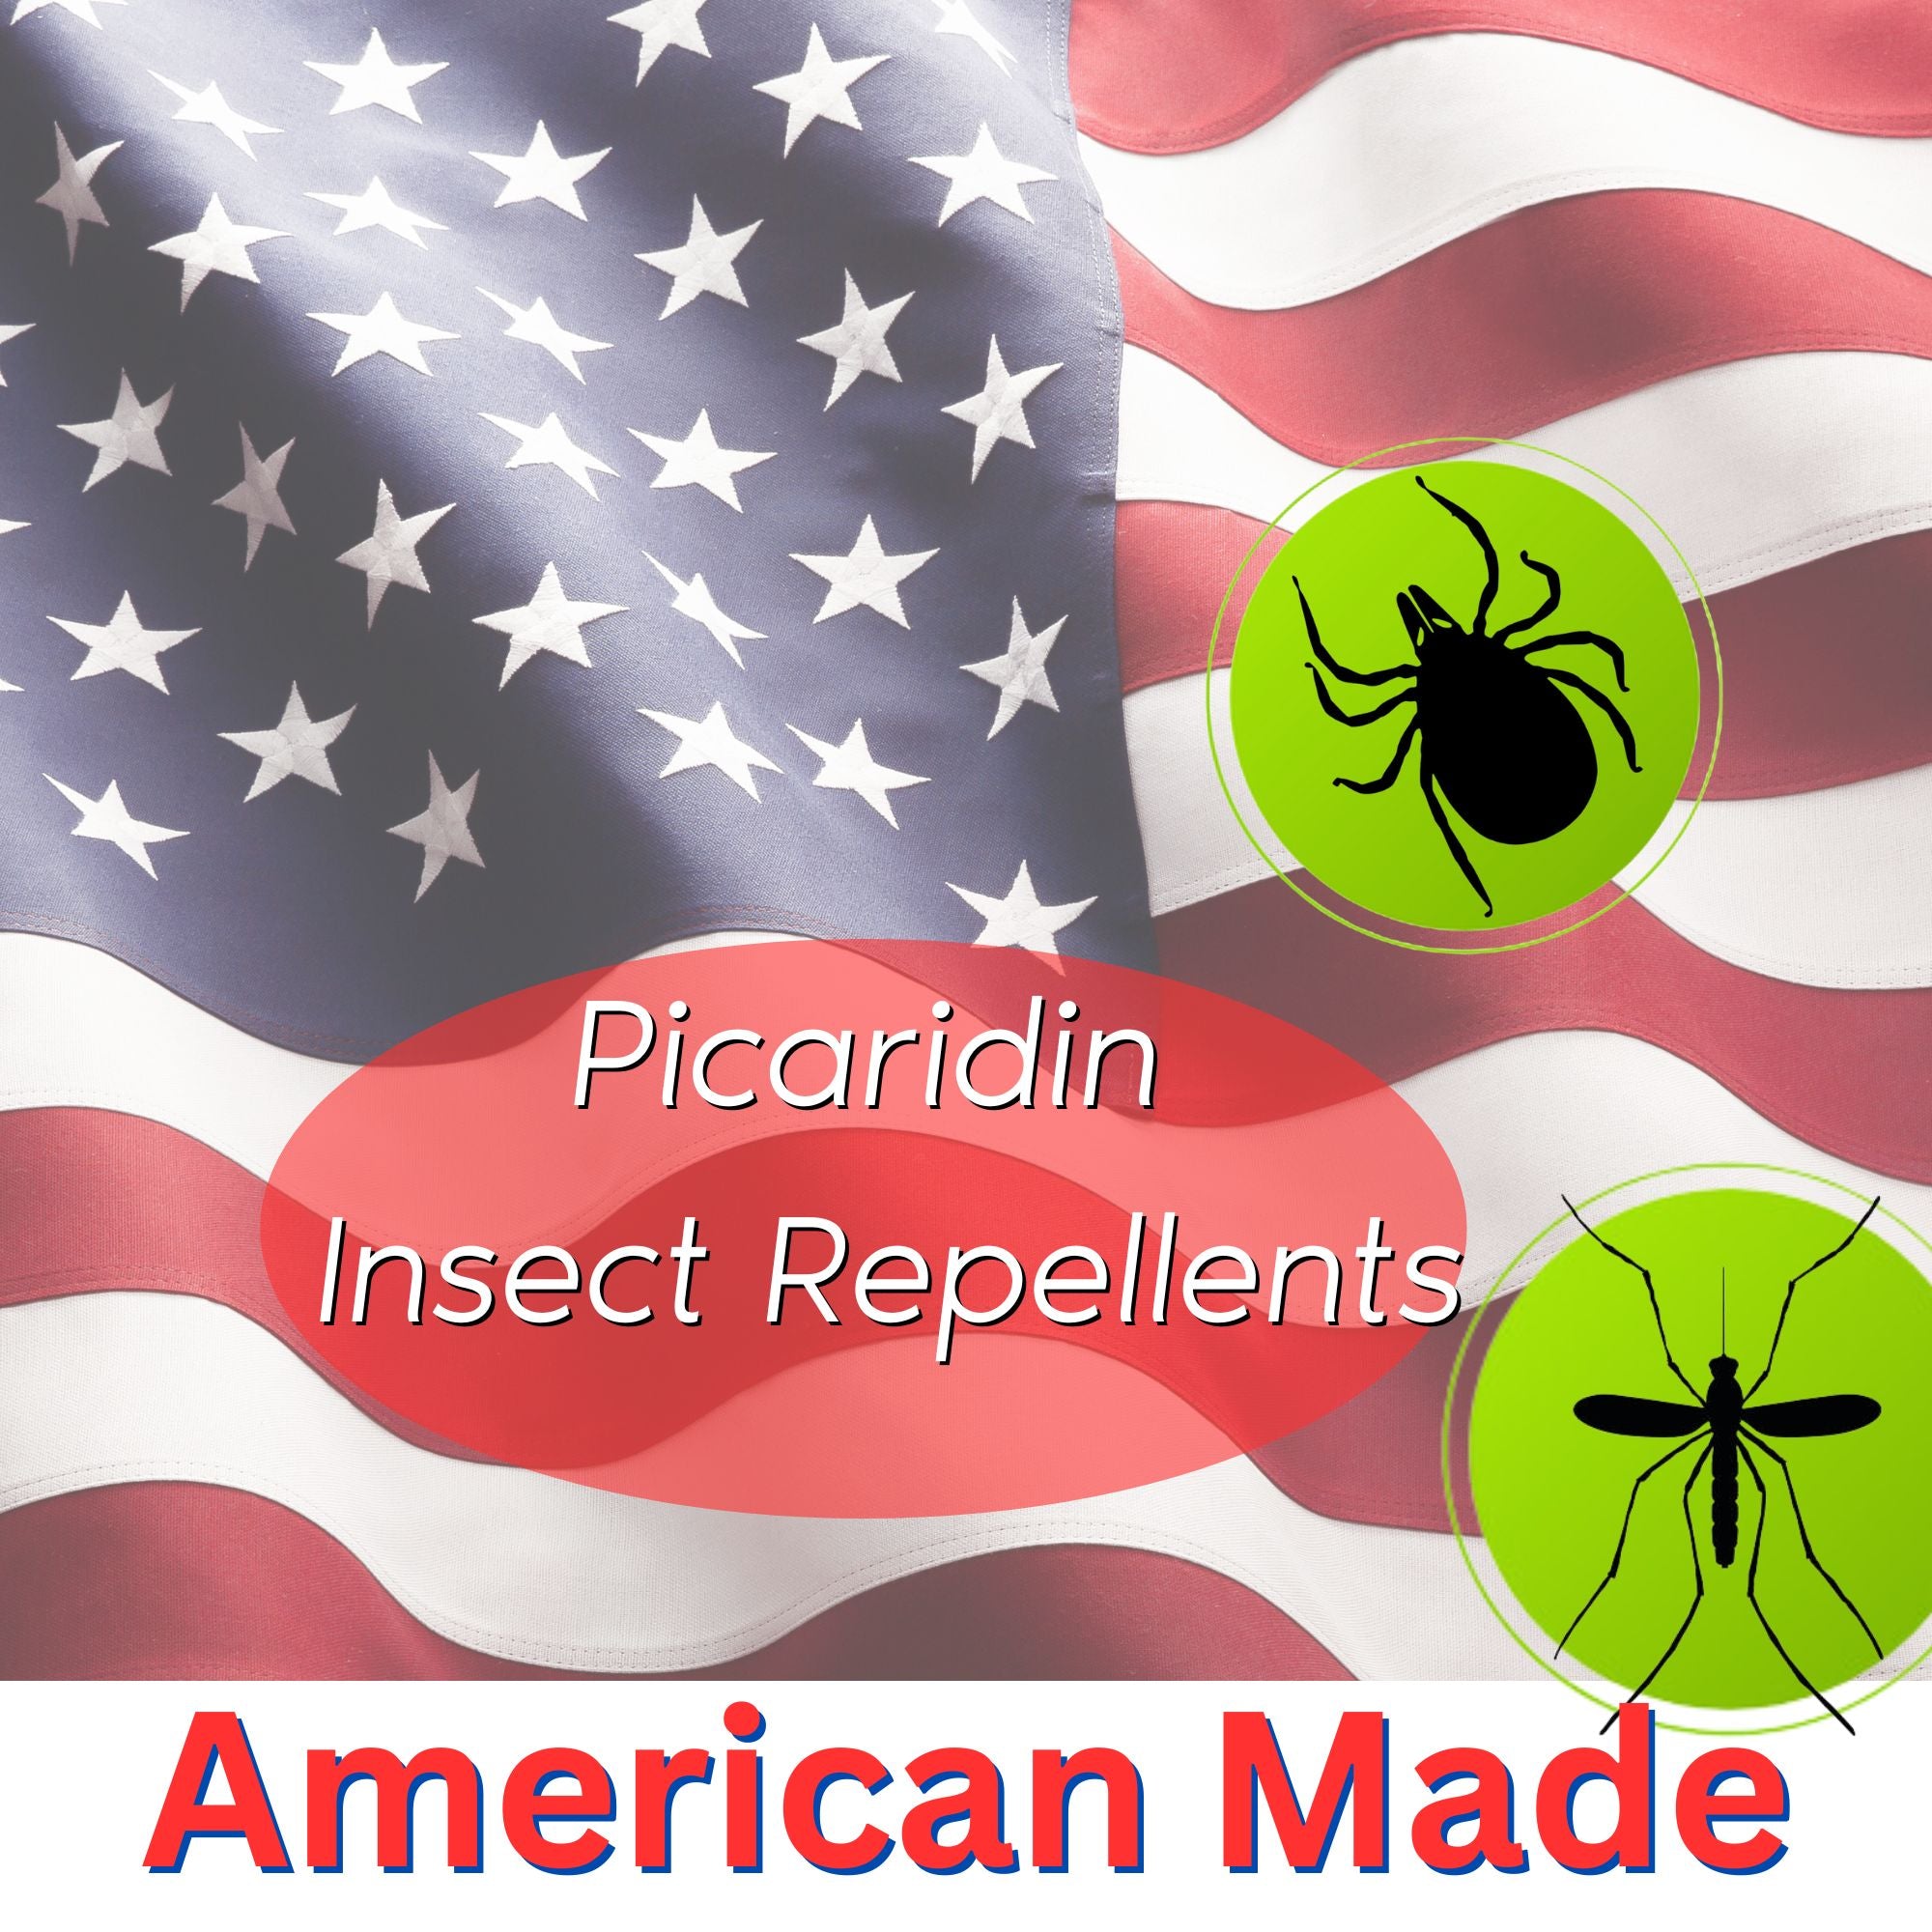 Insect Repellent, Picaridin, Scented Two Pack + Refill